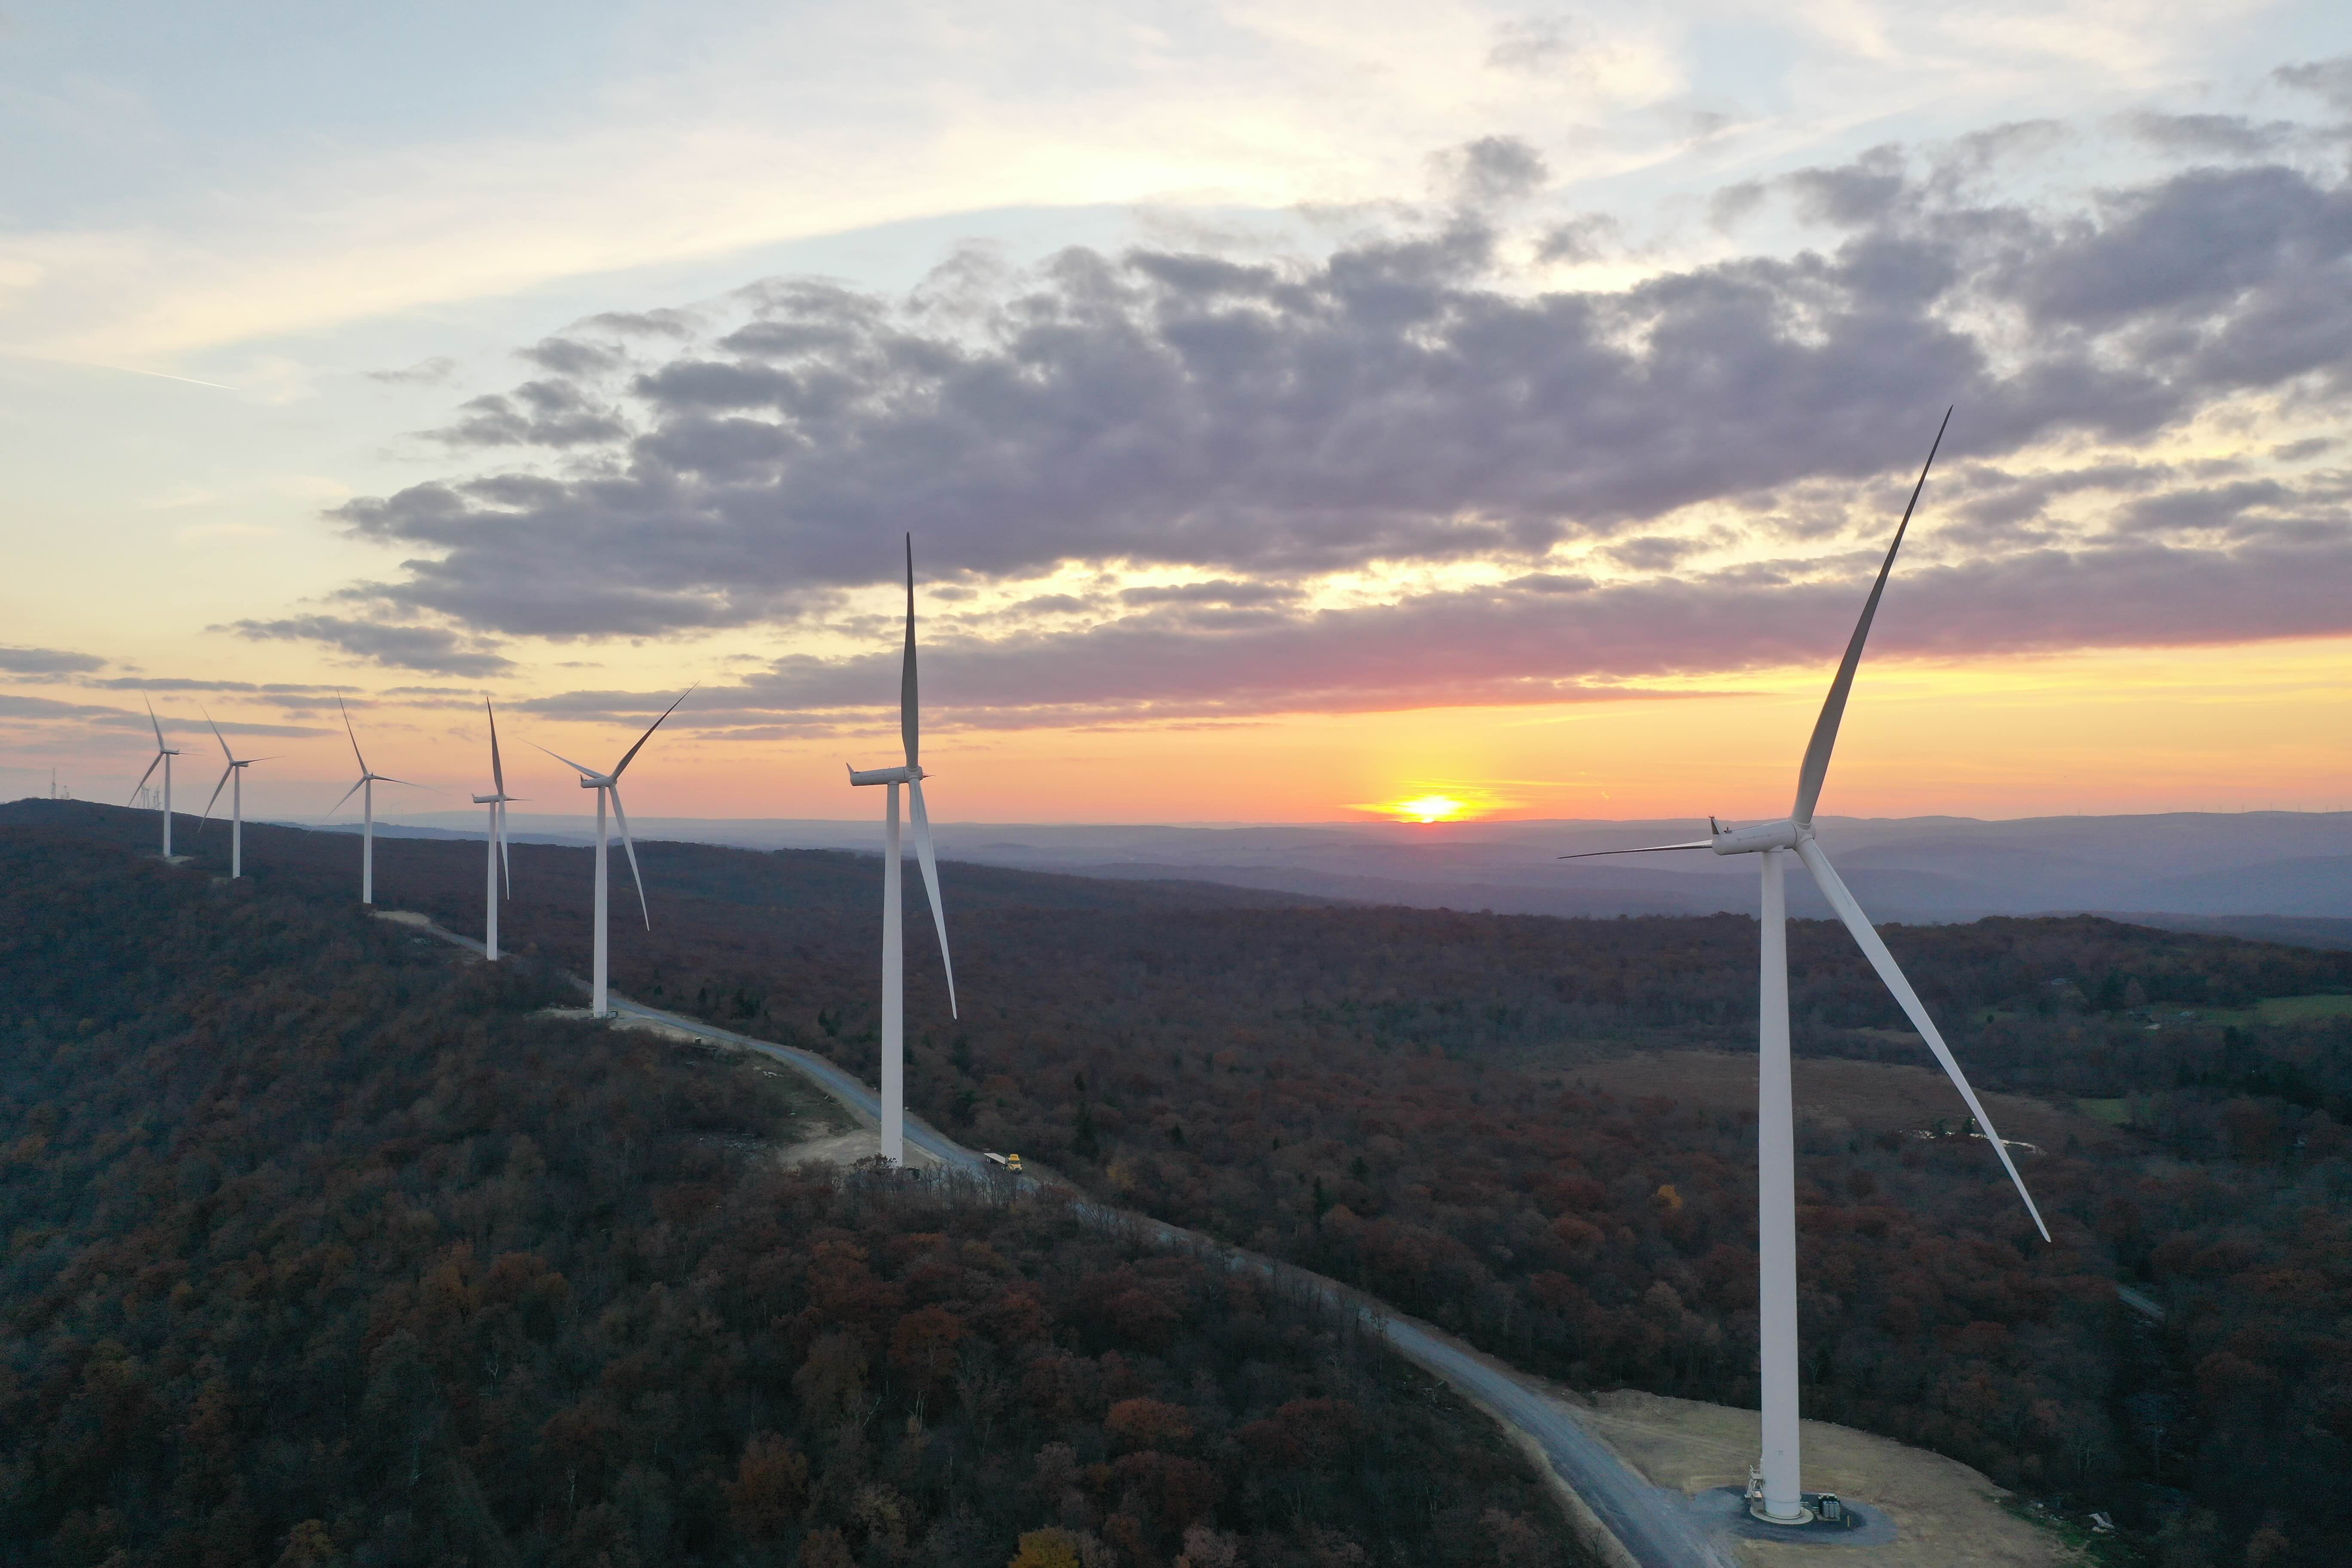 Drone shot of a row of wind turbines set against a sunset,Drone shot of a row of wind turbines set against a sunset